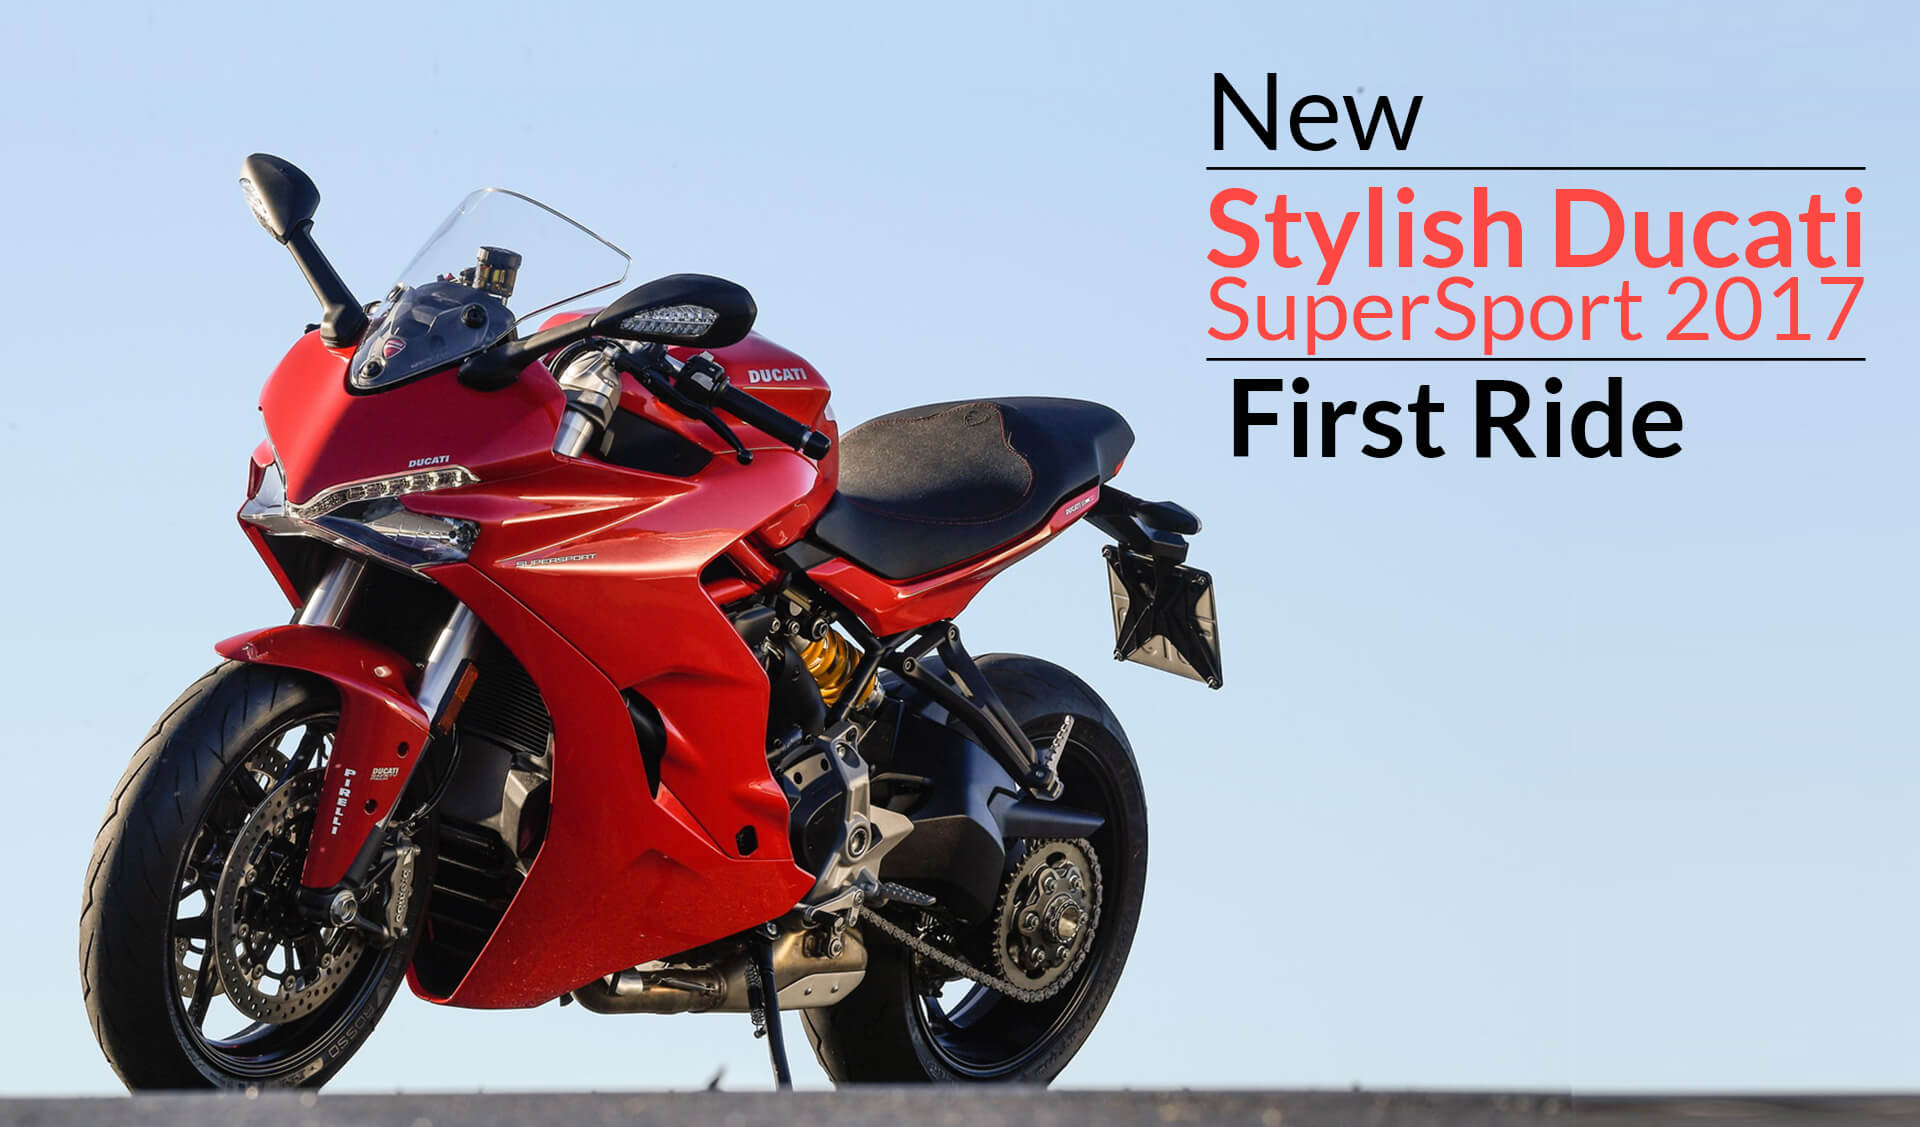 New Stylish Ducati SuperSport 2017 First Ride